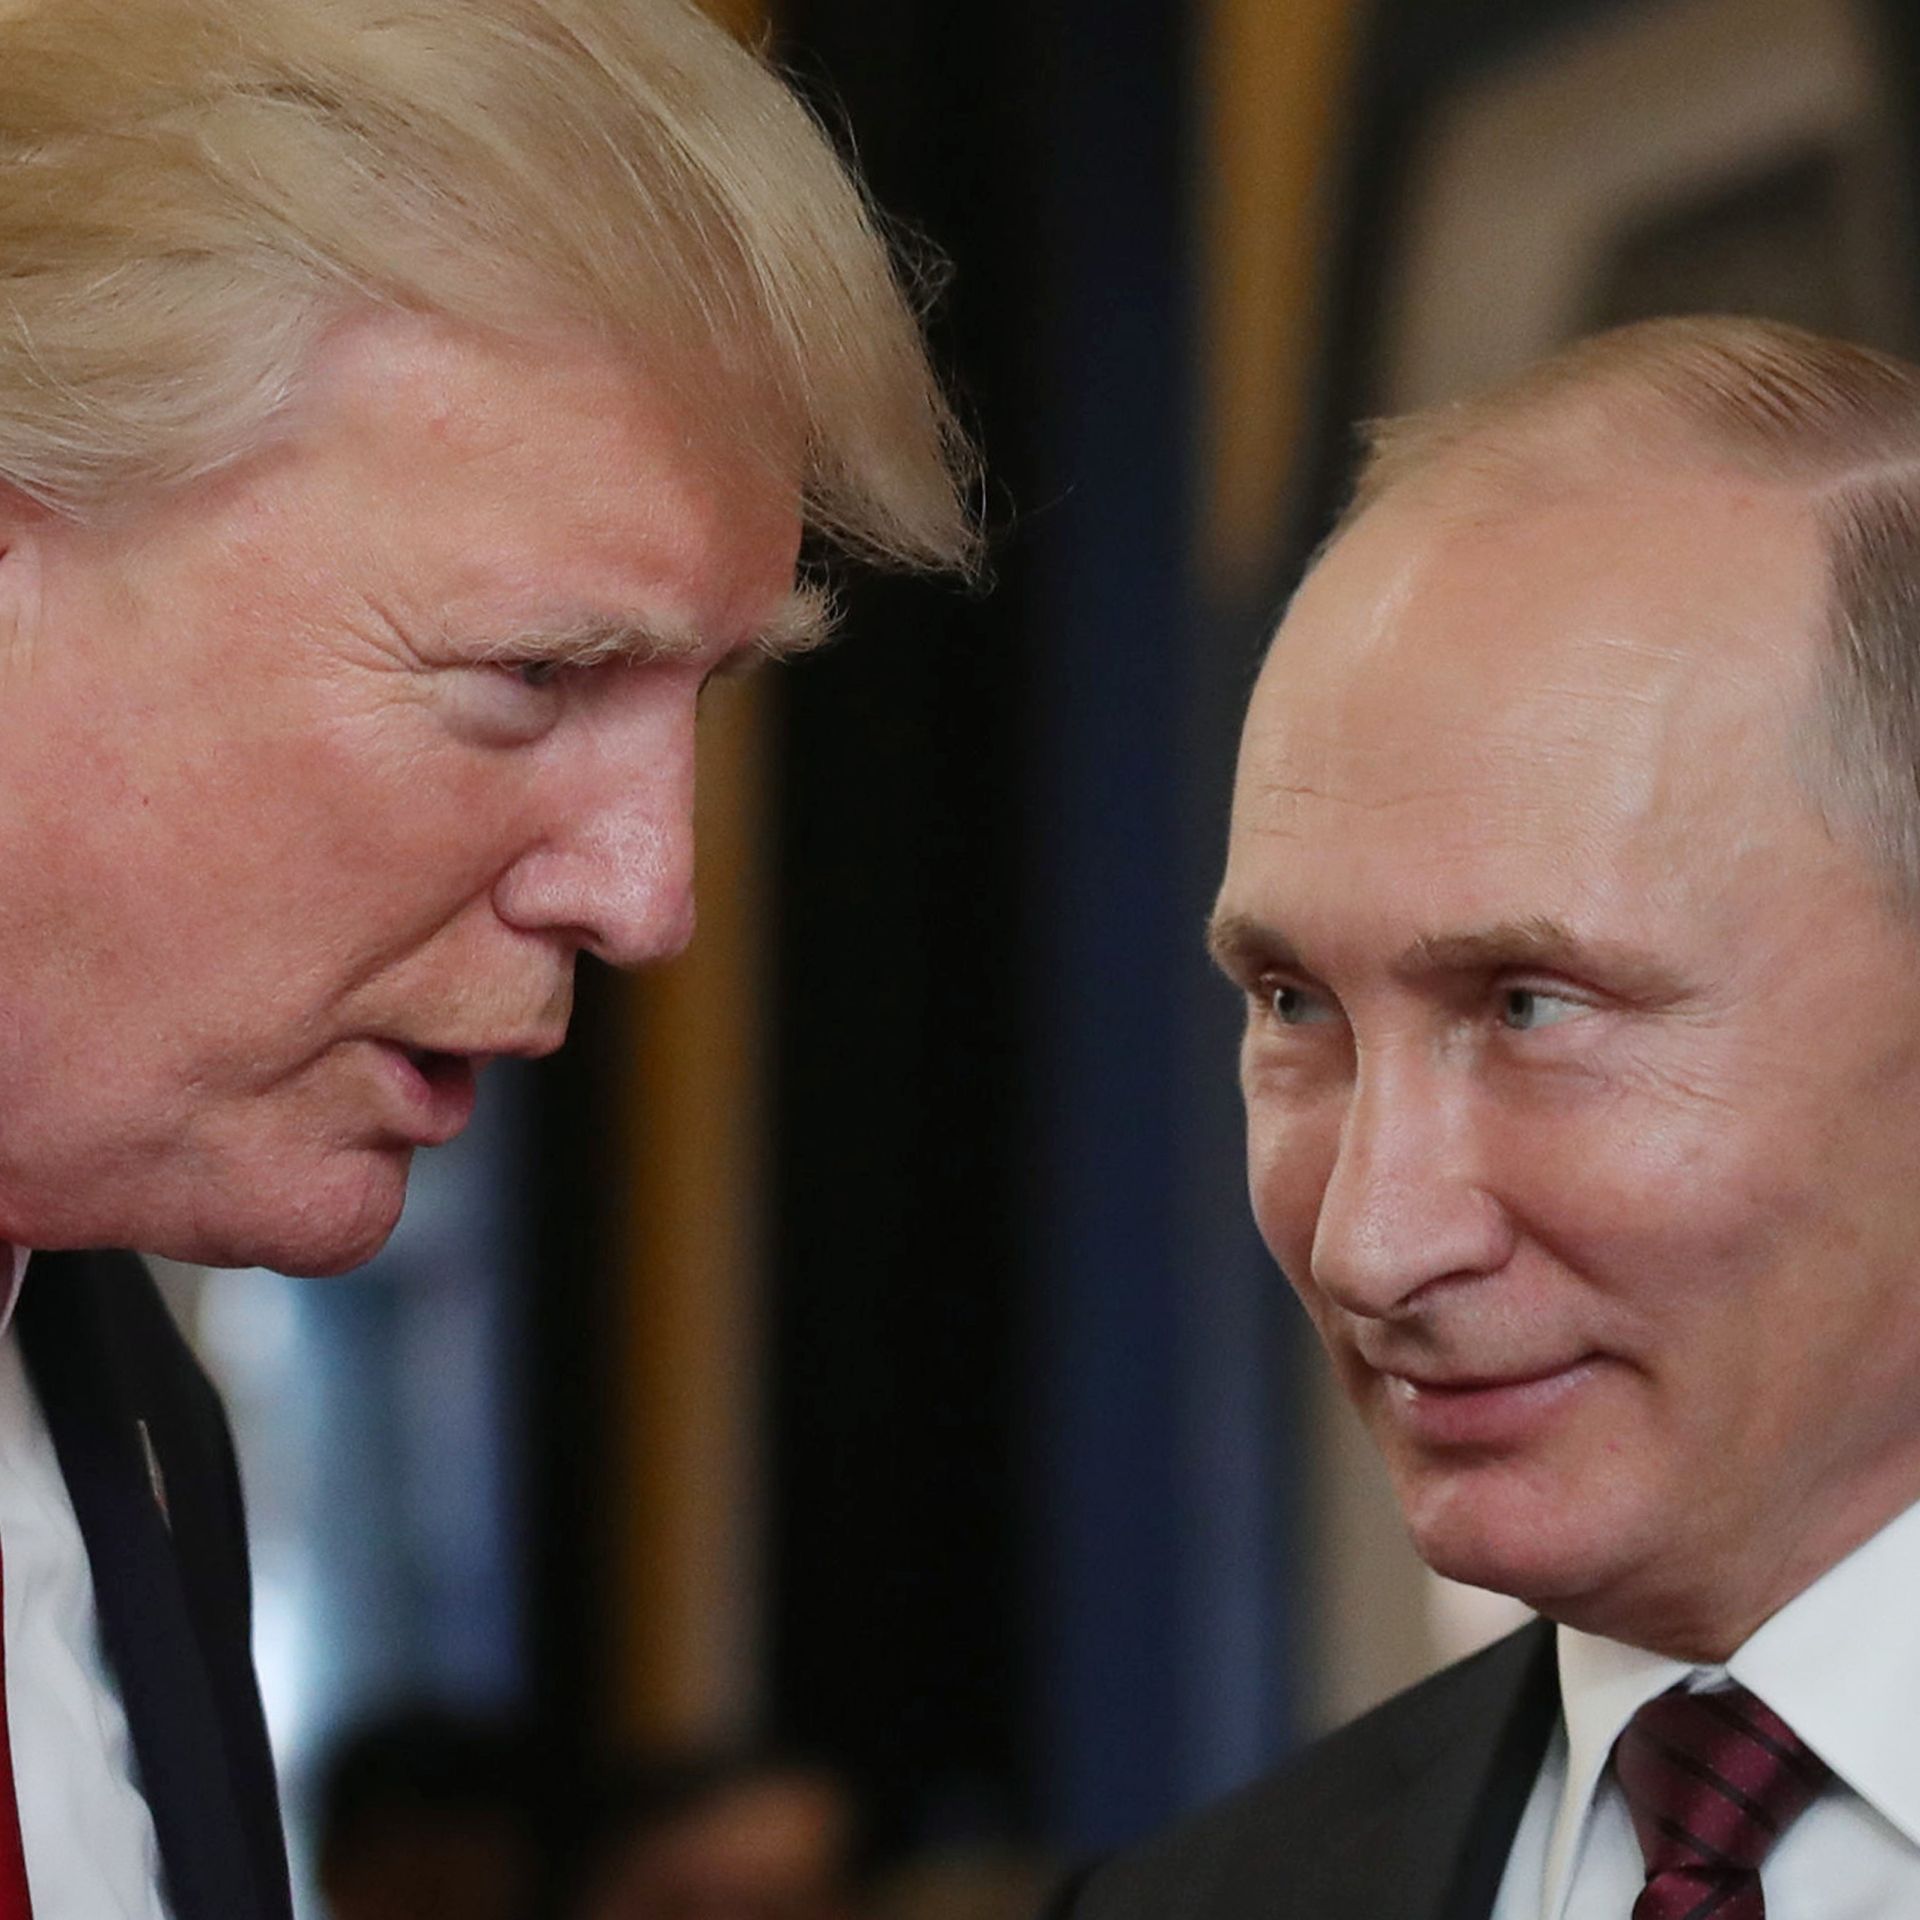 Trump and Putin facing each other in conversation